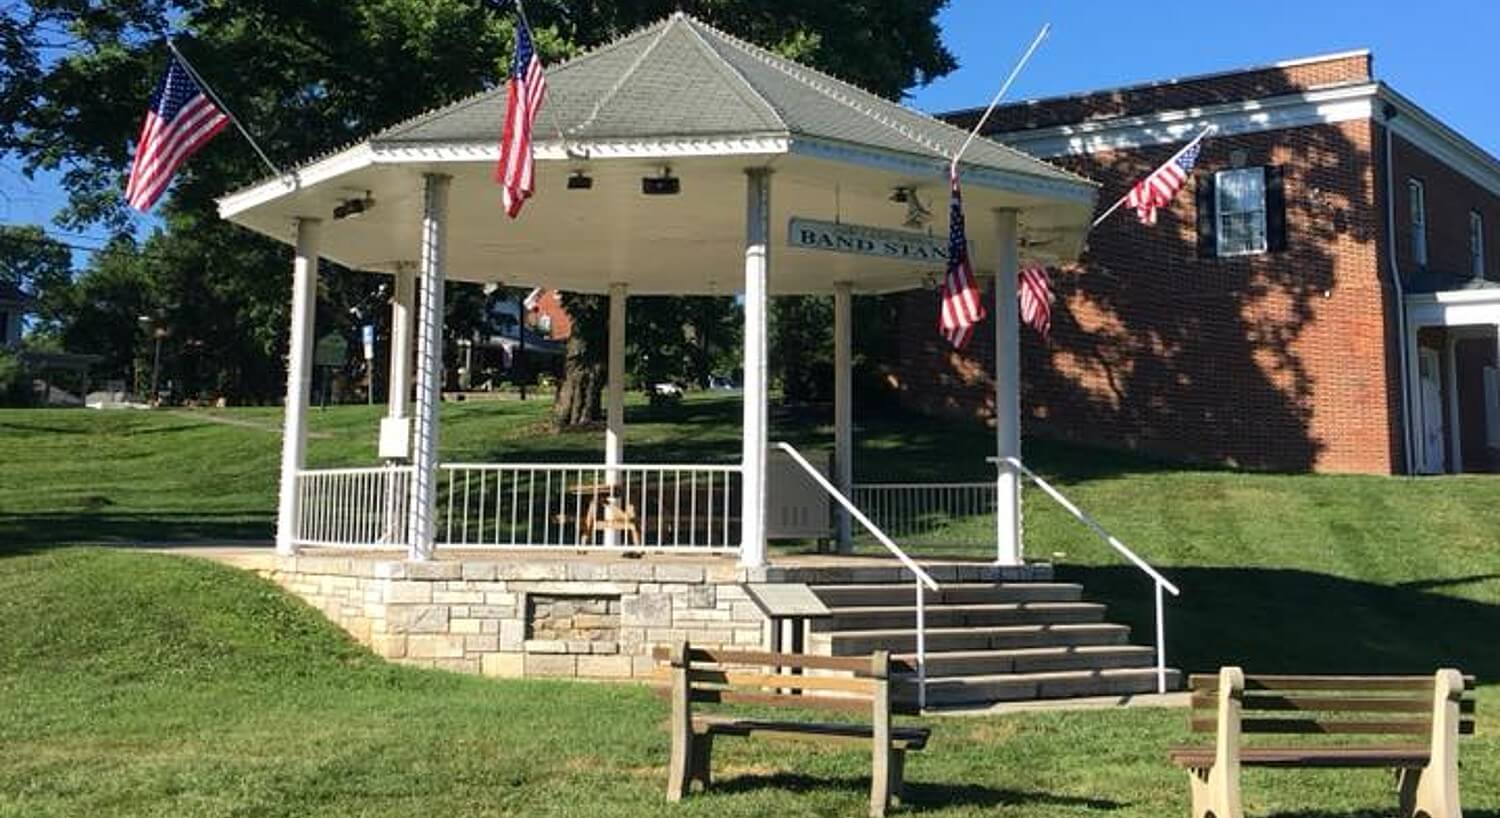 	Outdoor bandstand gazebo with American flags surrounded by green lawn